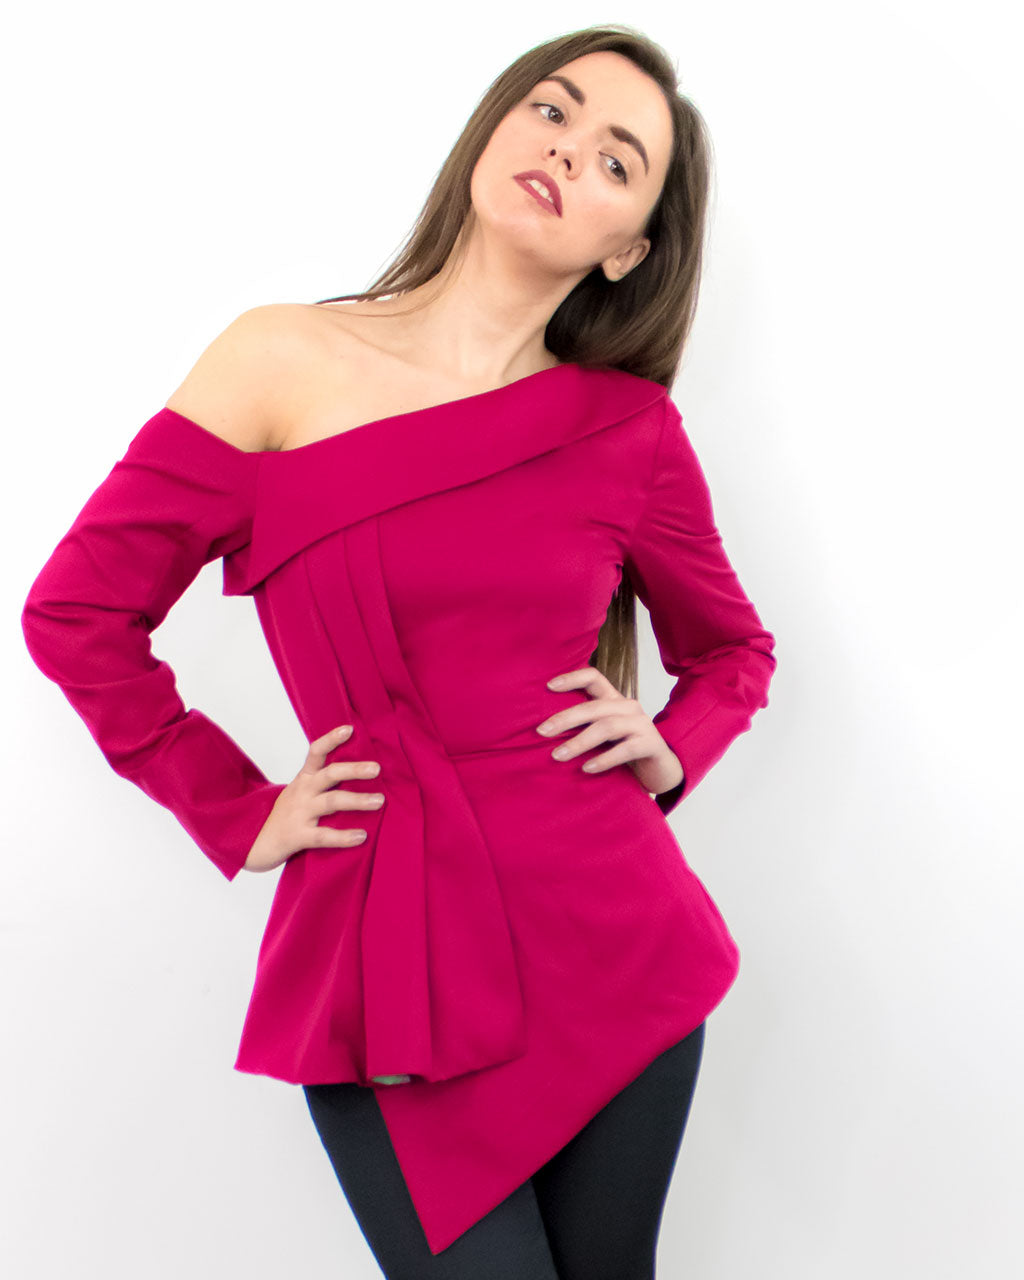 Sustainable designer women's red one shoulder long sleeve peplum asymmetric top ethical formal occasion party blouse ADKN UK